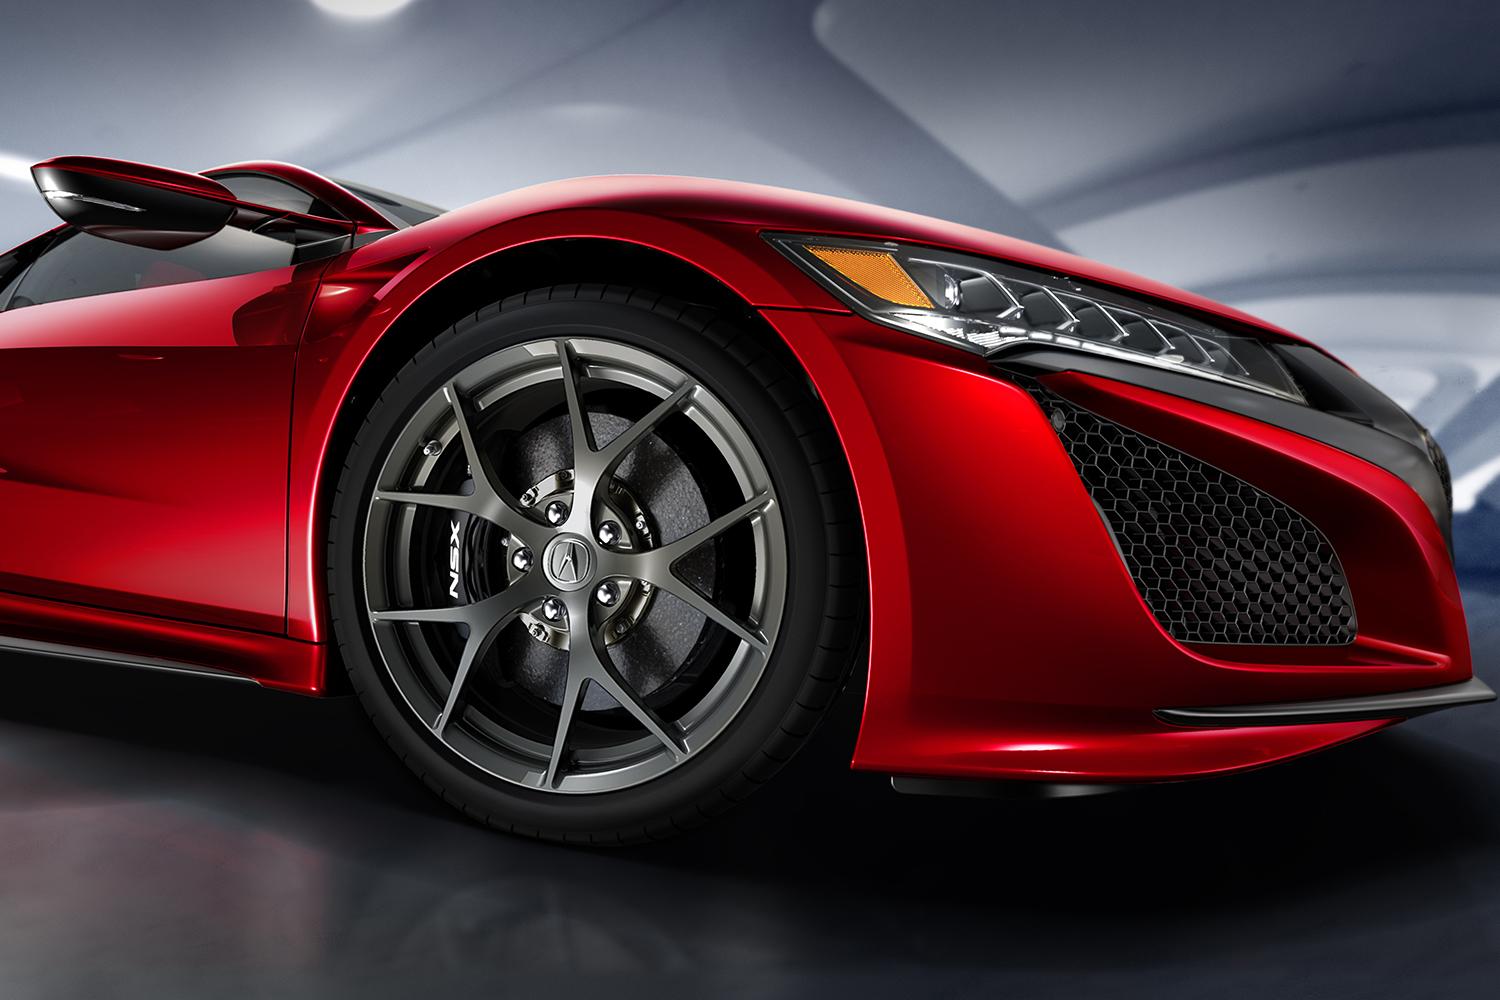 2016 acura nsx official specs pictures and performance reveal das2015 027b